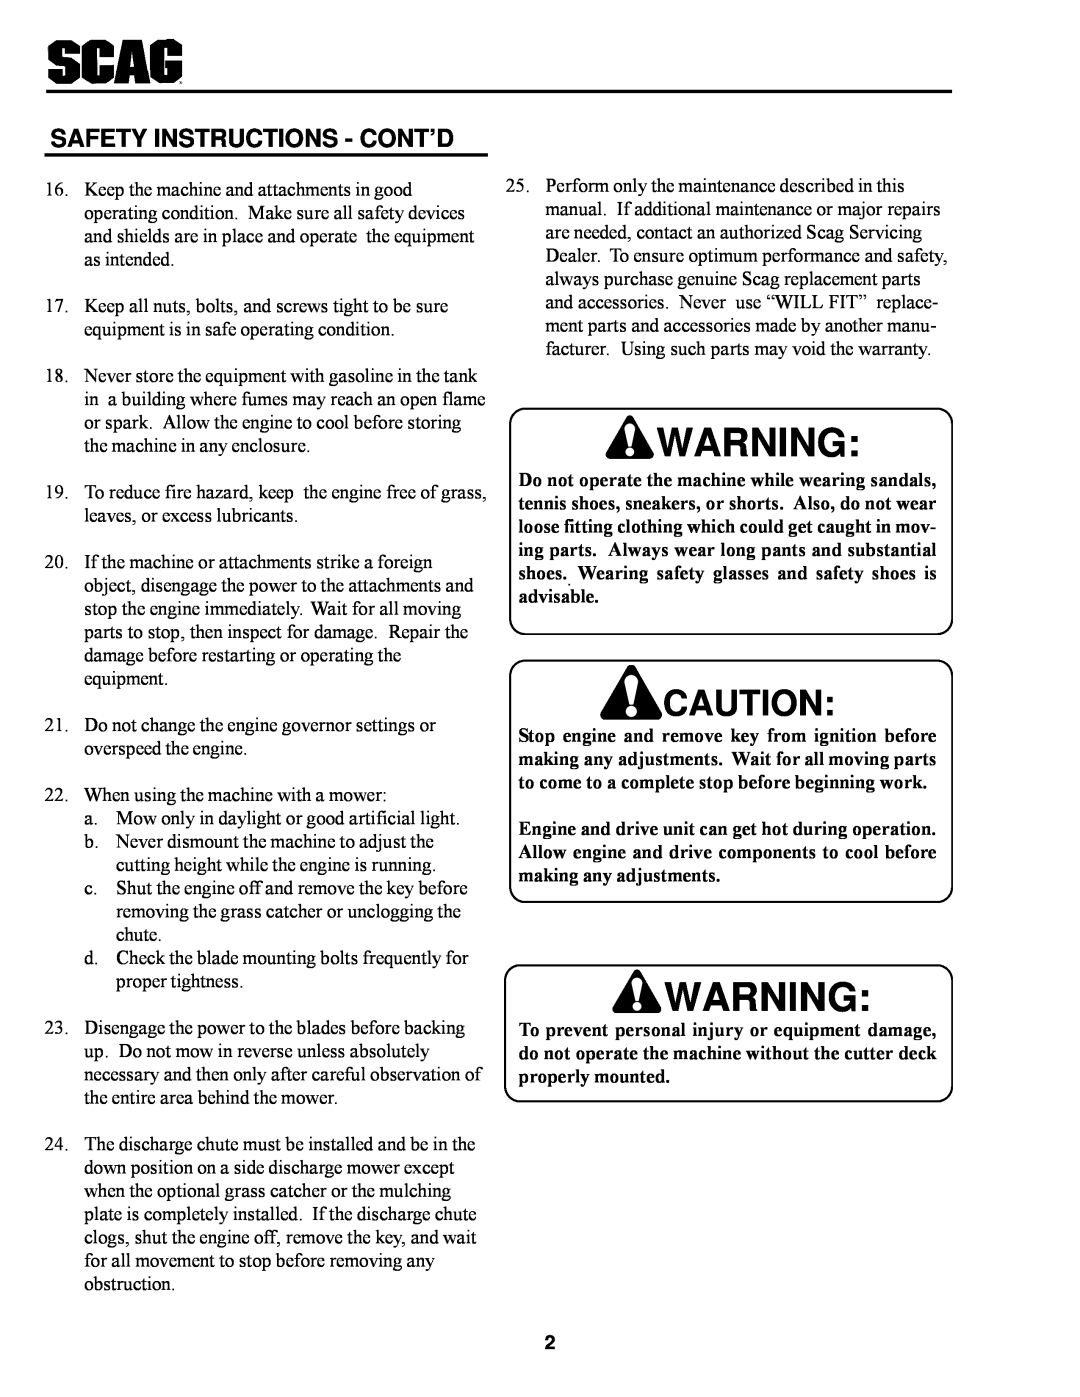 Scag Power Equipment SSZ operating instructions Safety Instructions - Cont’D 